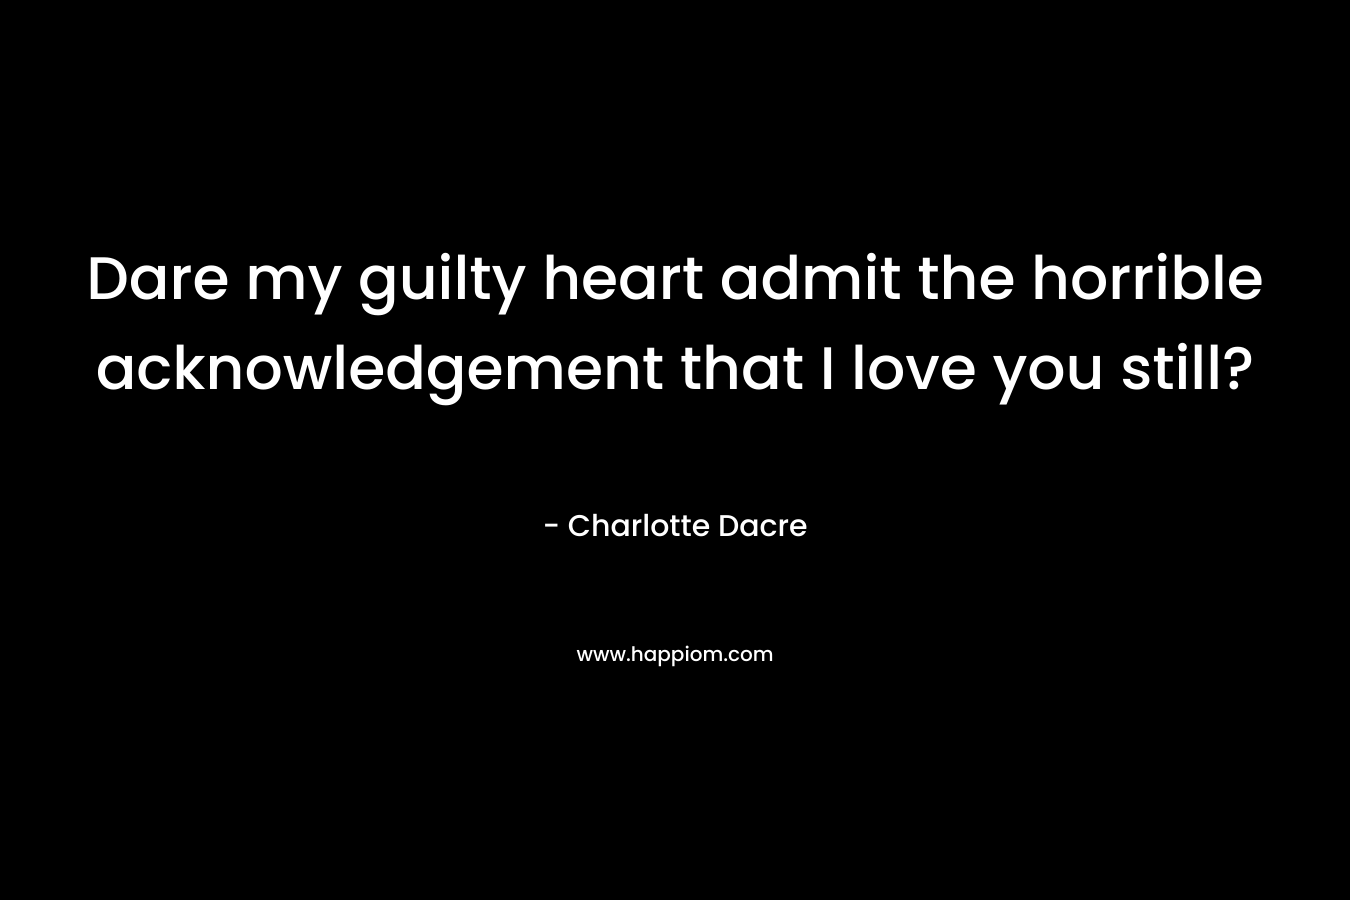 Dare my guilty heart admit the horrible acknowledgement that I love you still? – Charlotte Dacre